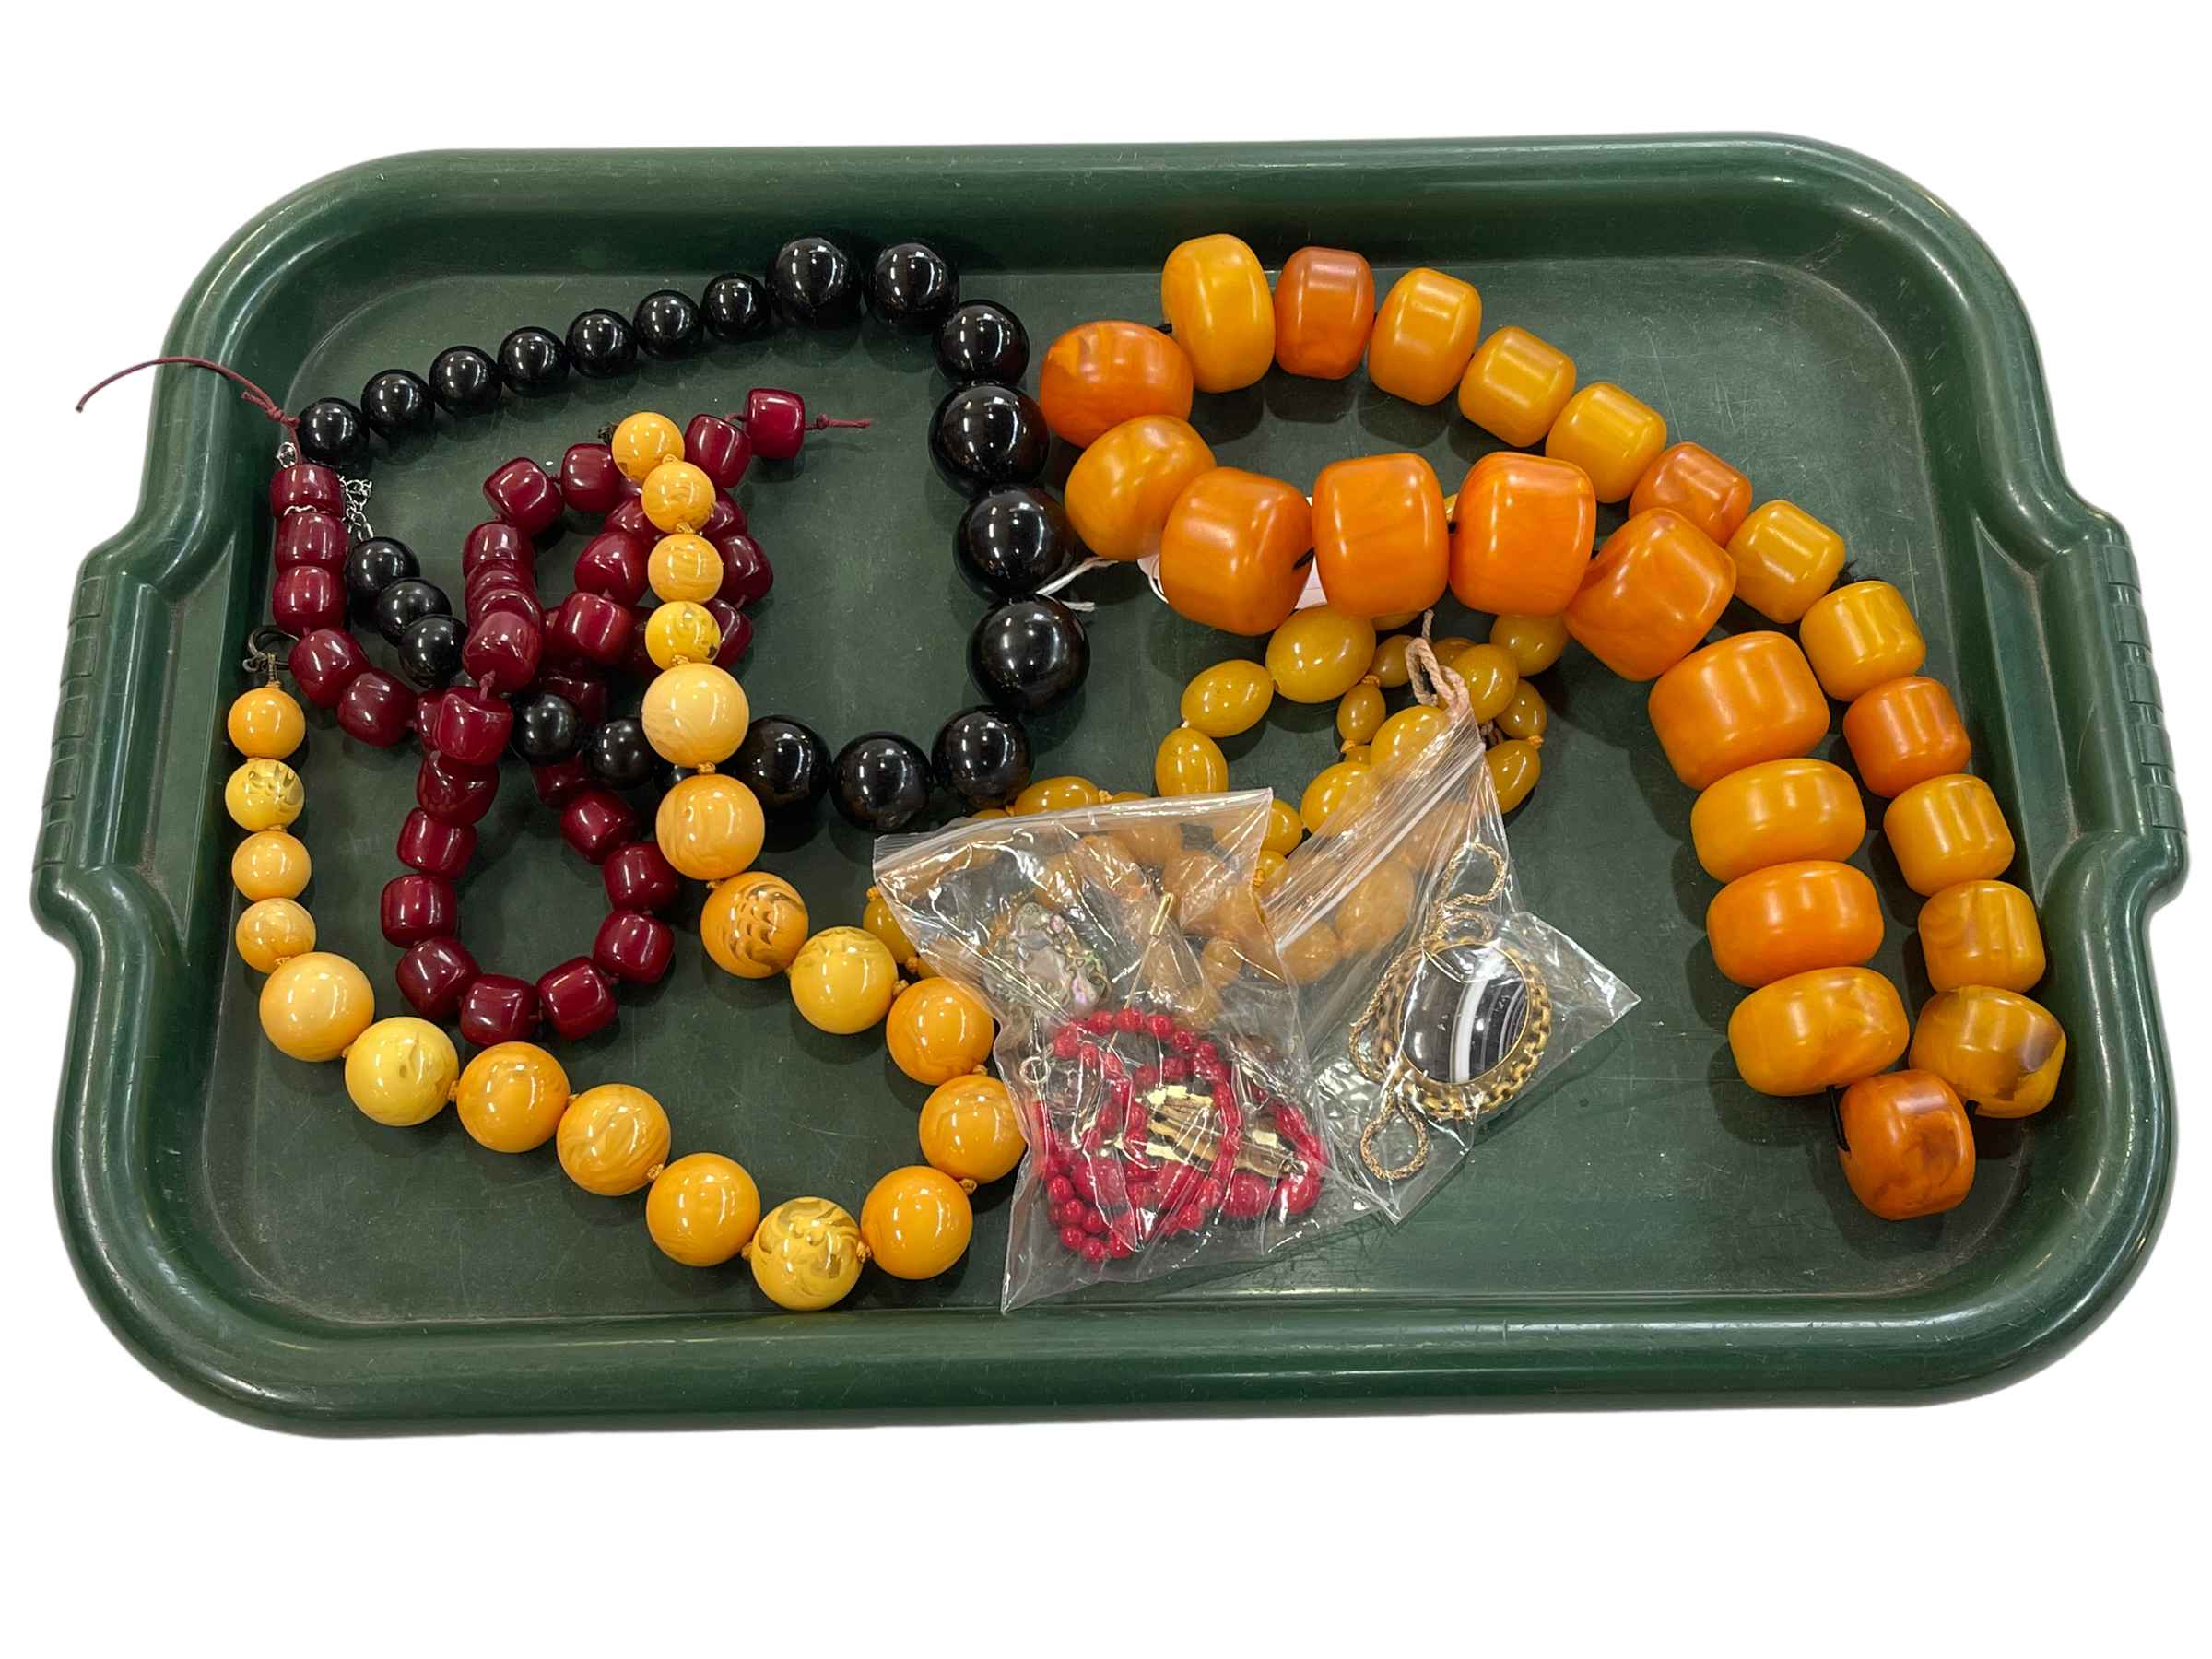 Bead necklaces, agate brooch, (amber?), etc.